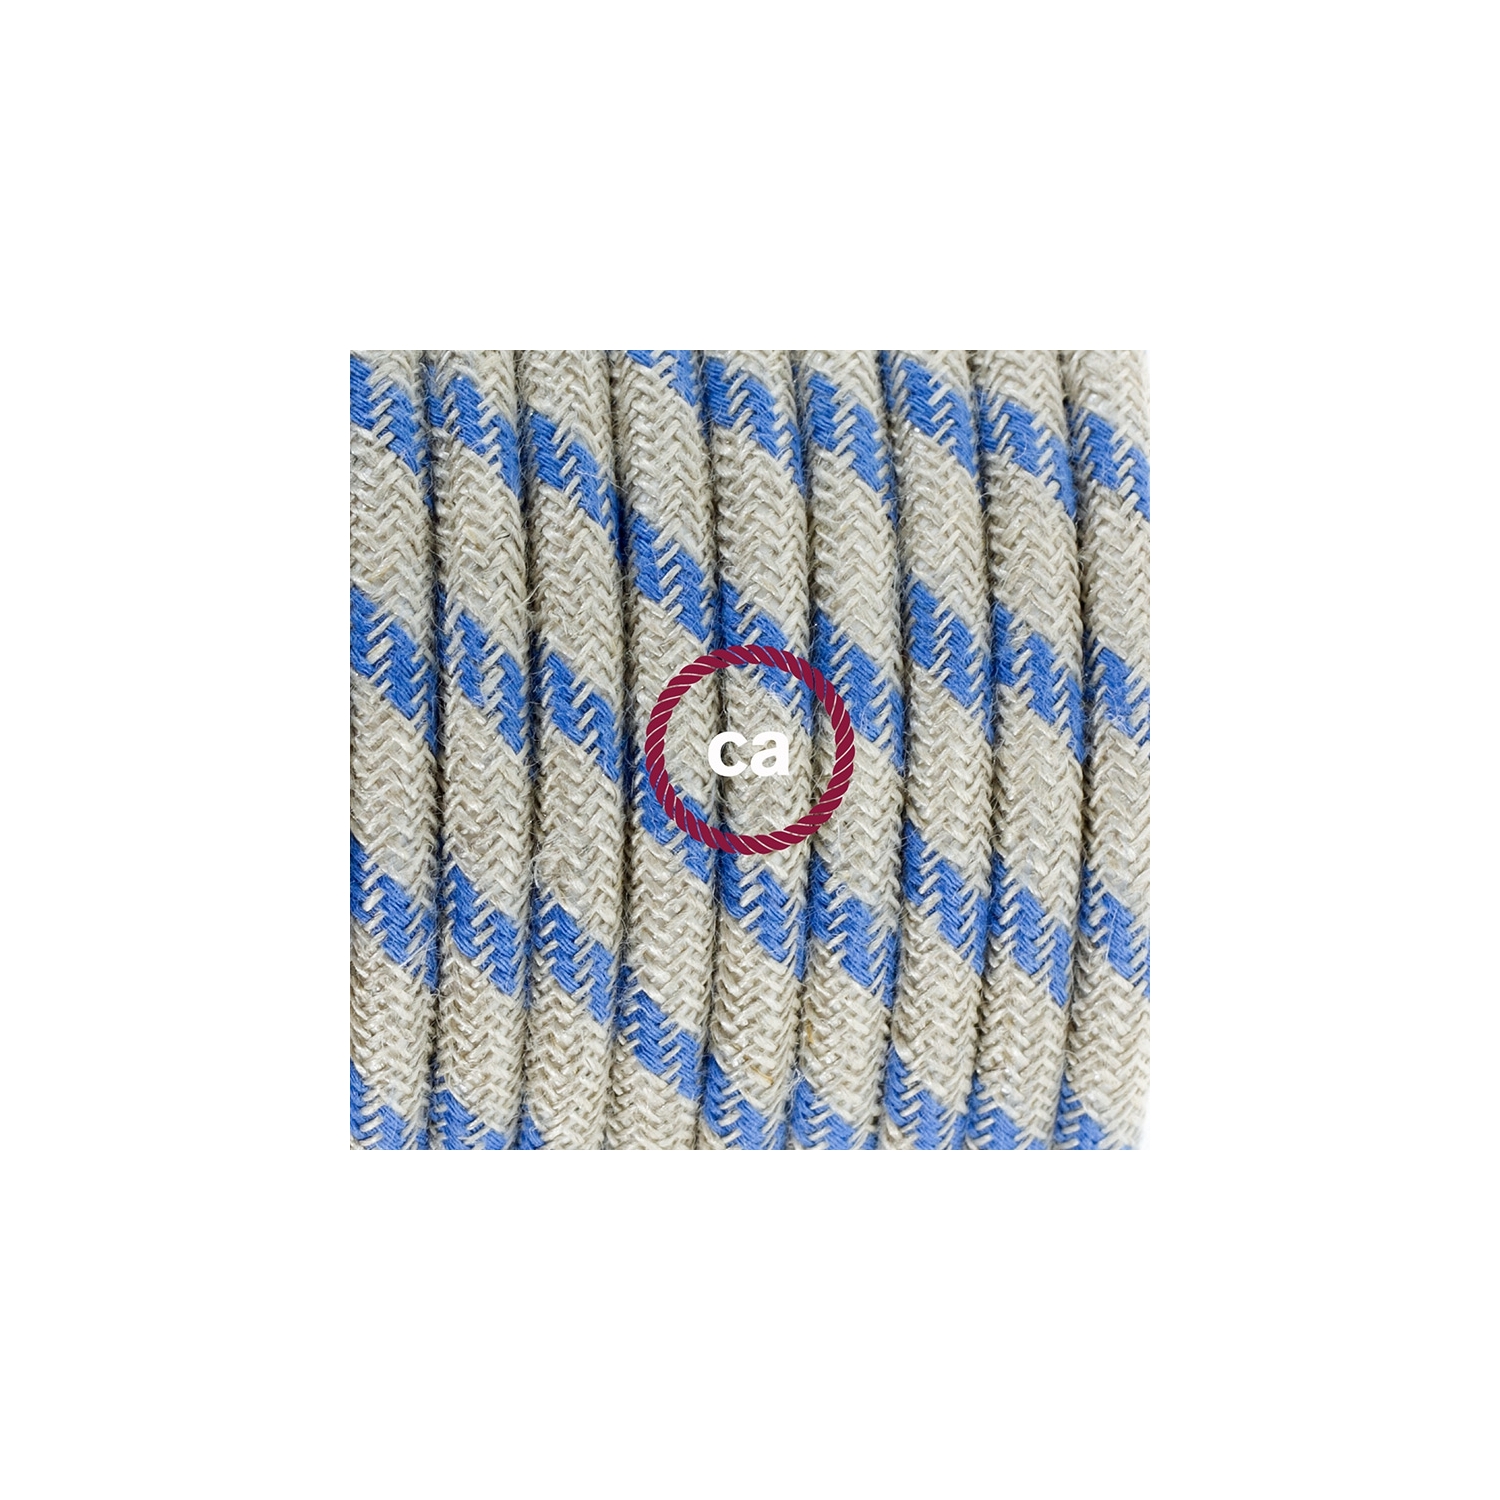 Plug-in Pendant for Lampshade with switch on socket | RD55 Natural & Blue Linen Stripe